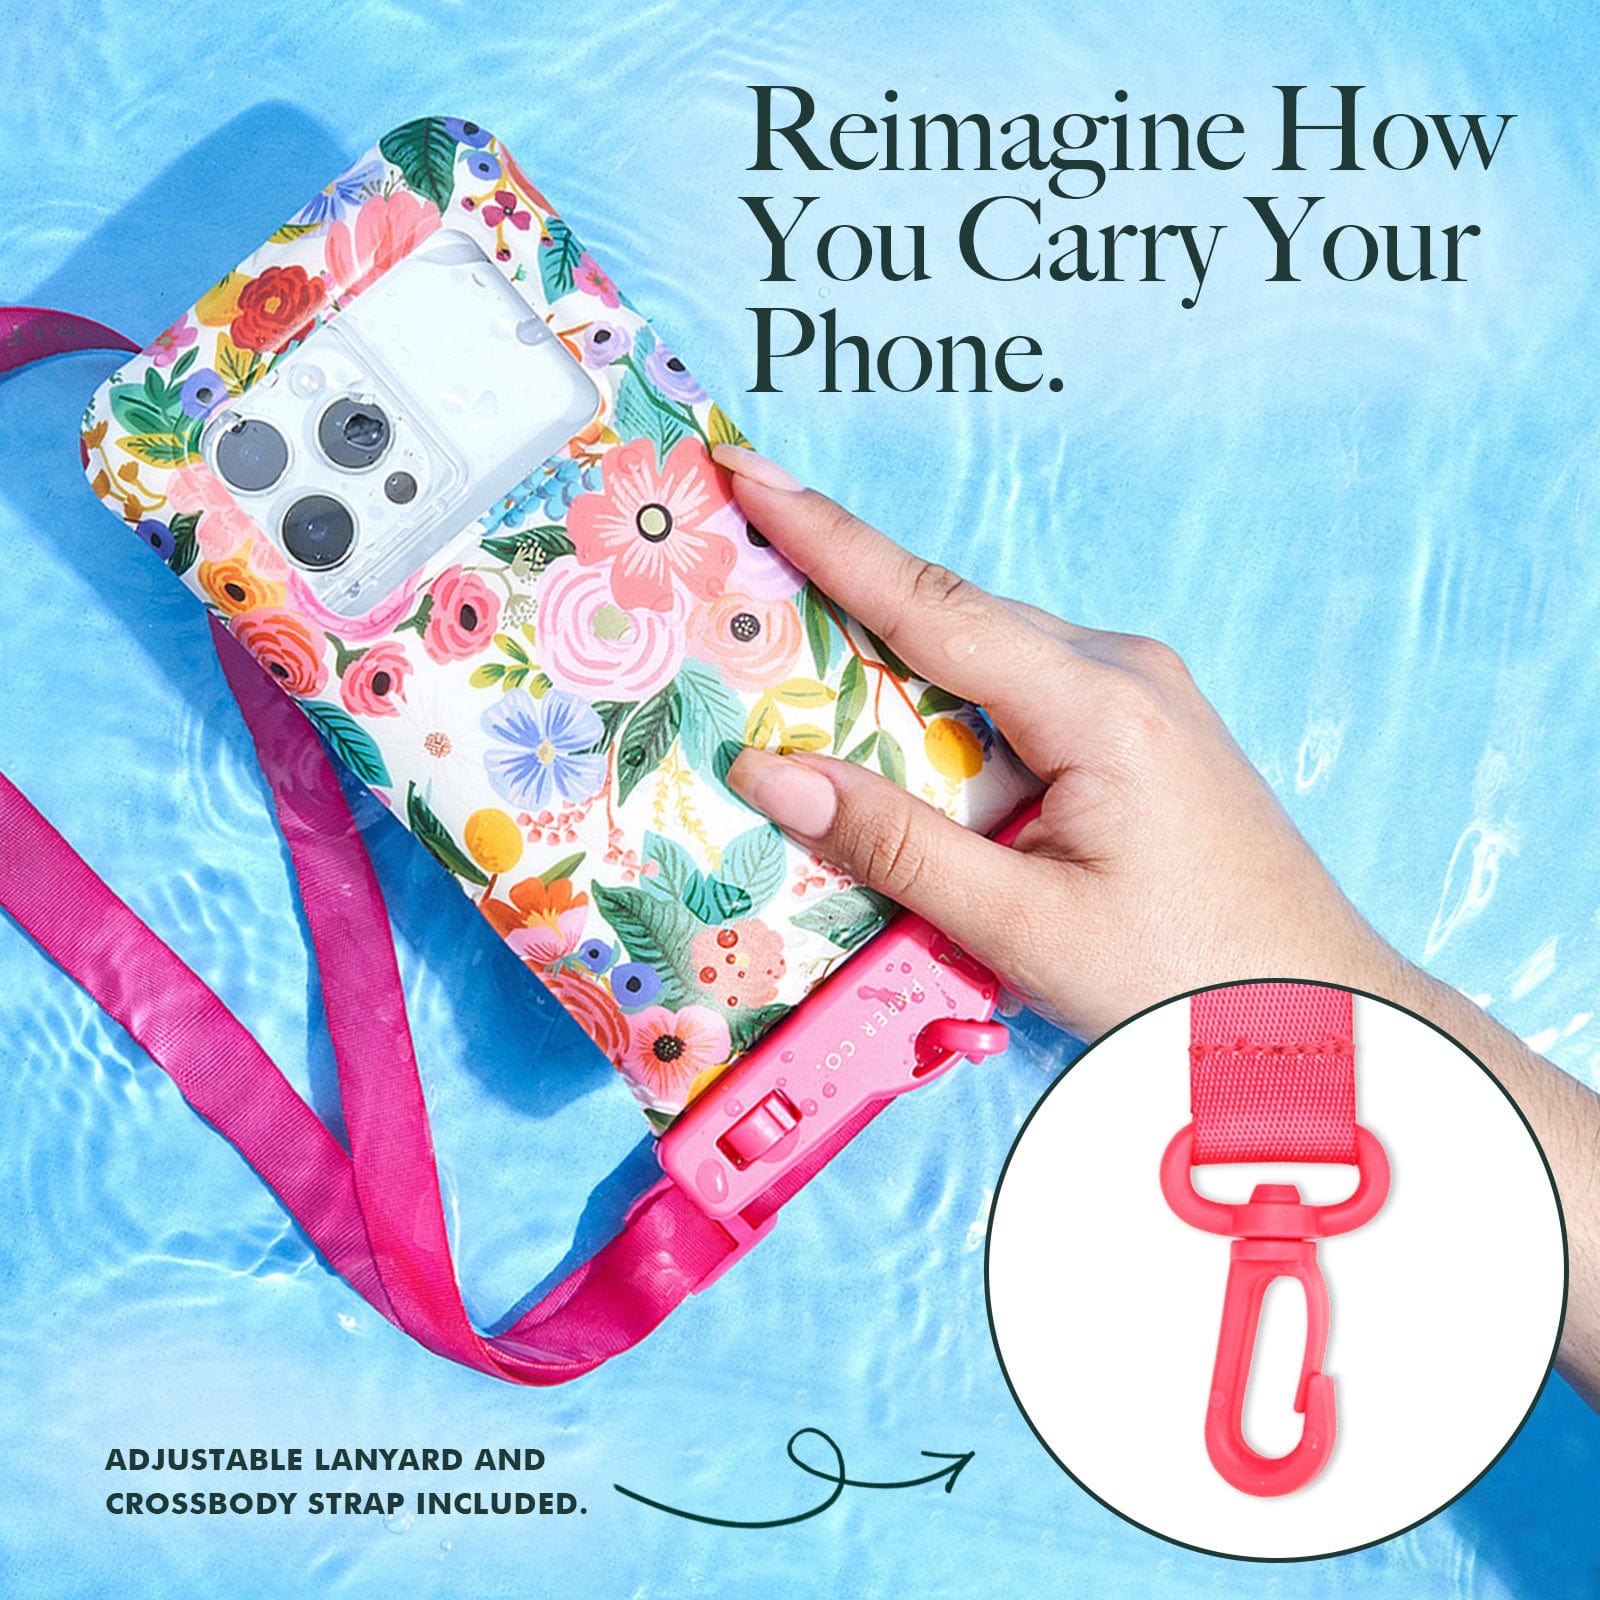 REIMAGINE HOW YOU CARRY YOUR PHONE. ADJUSTABLE LANYARD AND CROSSBODY STRAP INCLUDED. 